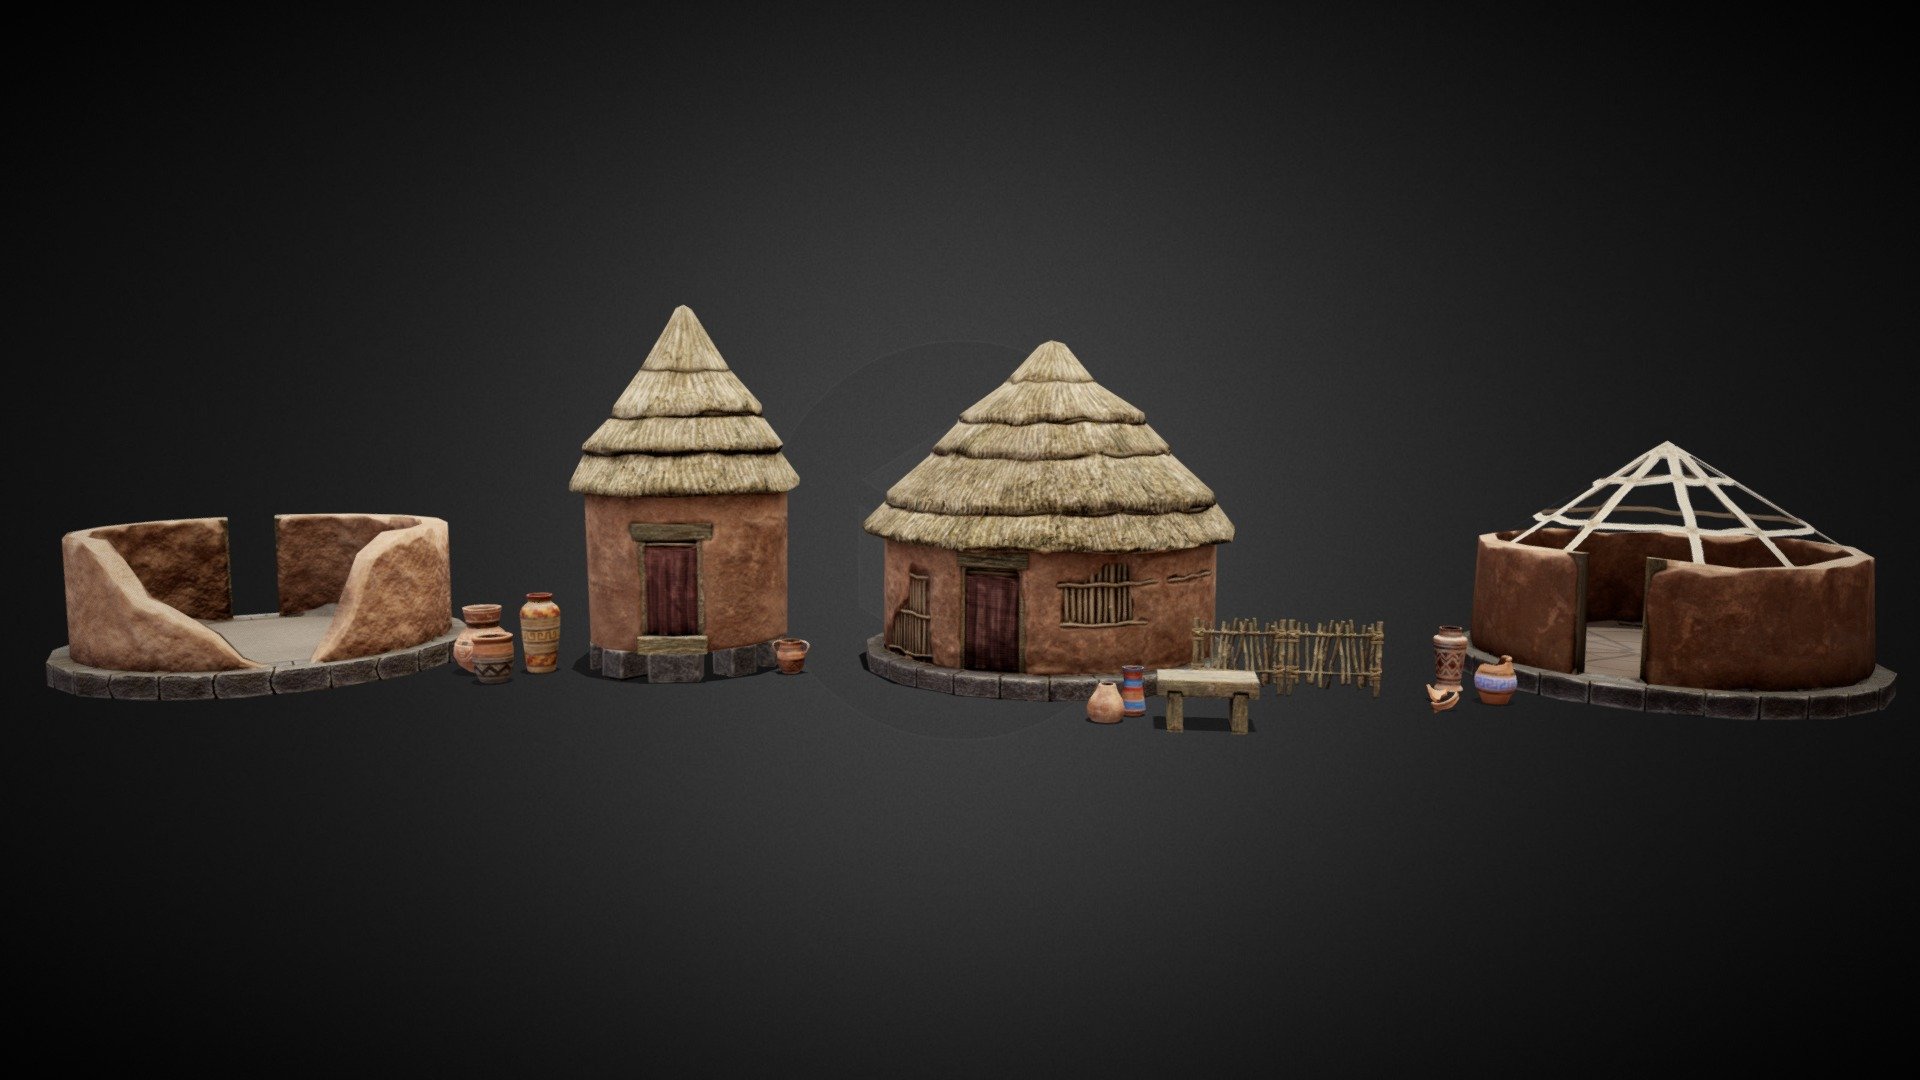 Assets was made for second AZTLAN location in the mobile game Wild Hunt for Ten Square Games. Sculpture made in Zbrush, retopology and uv-mapping in Blender, textures in Substance Painter 3d model